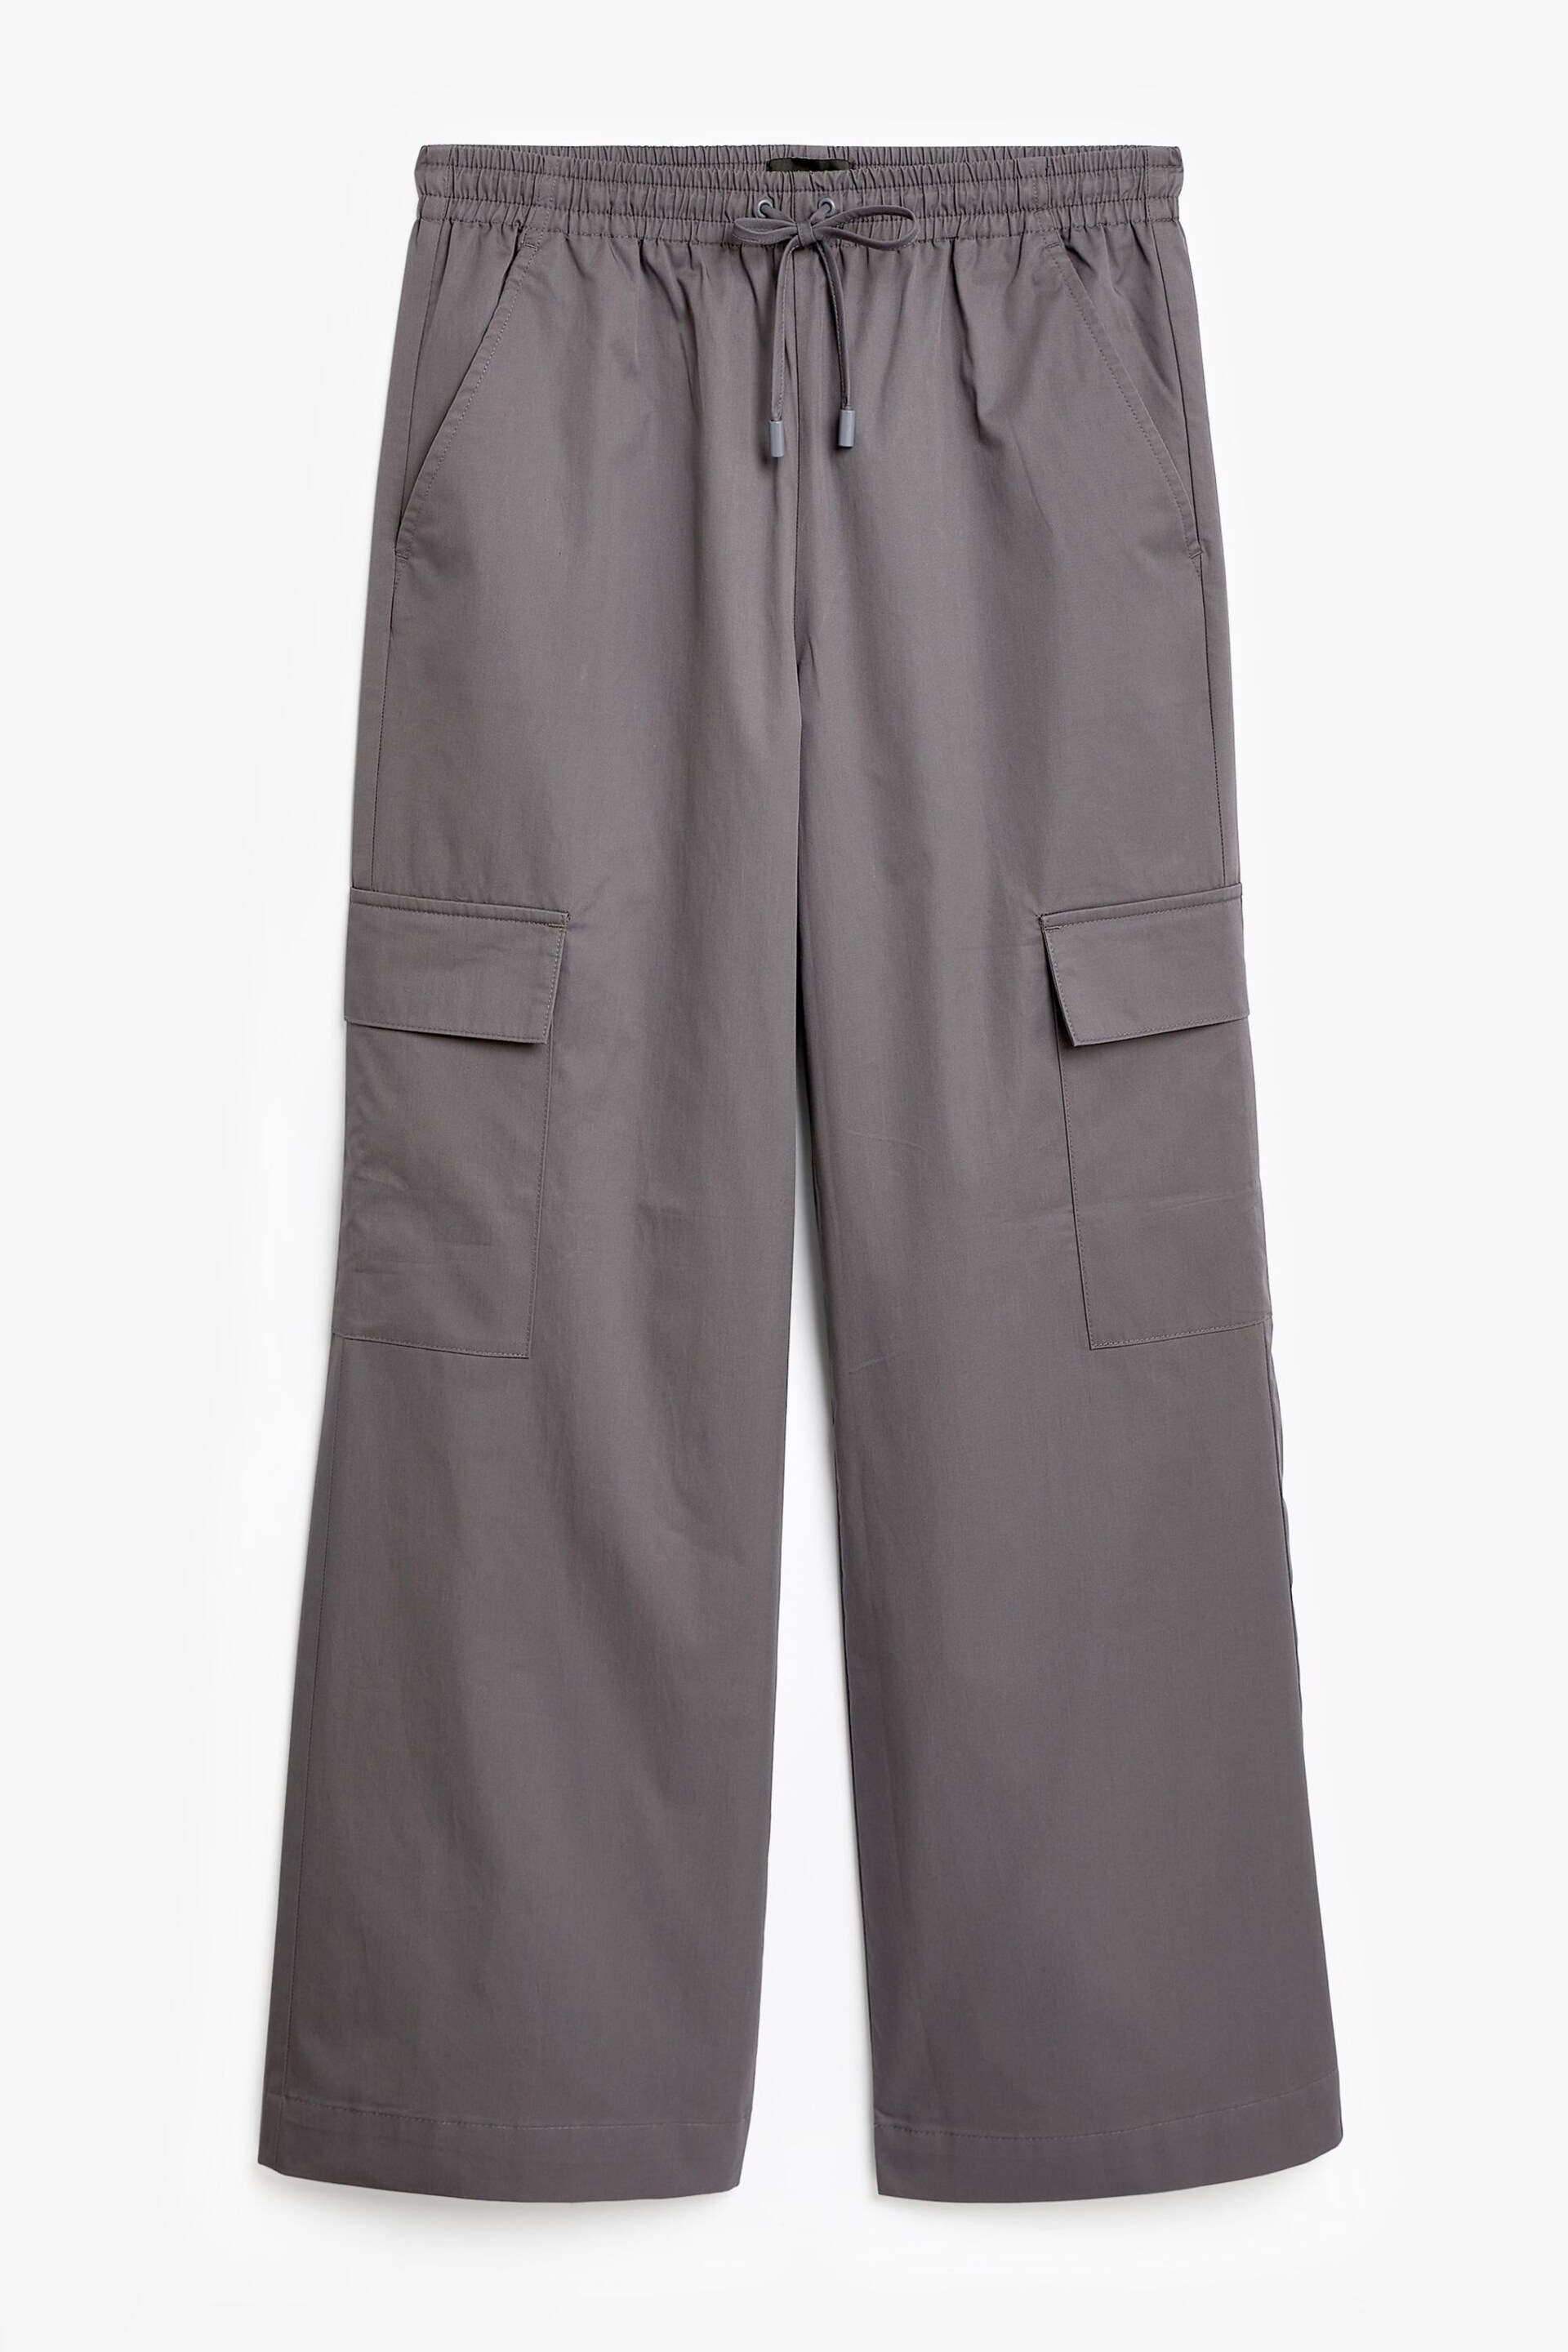 Charcoal Grey Wide Leg Cargo Trousers - Image 5 of 6